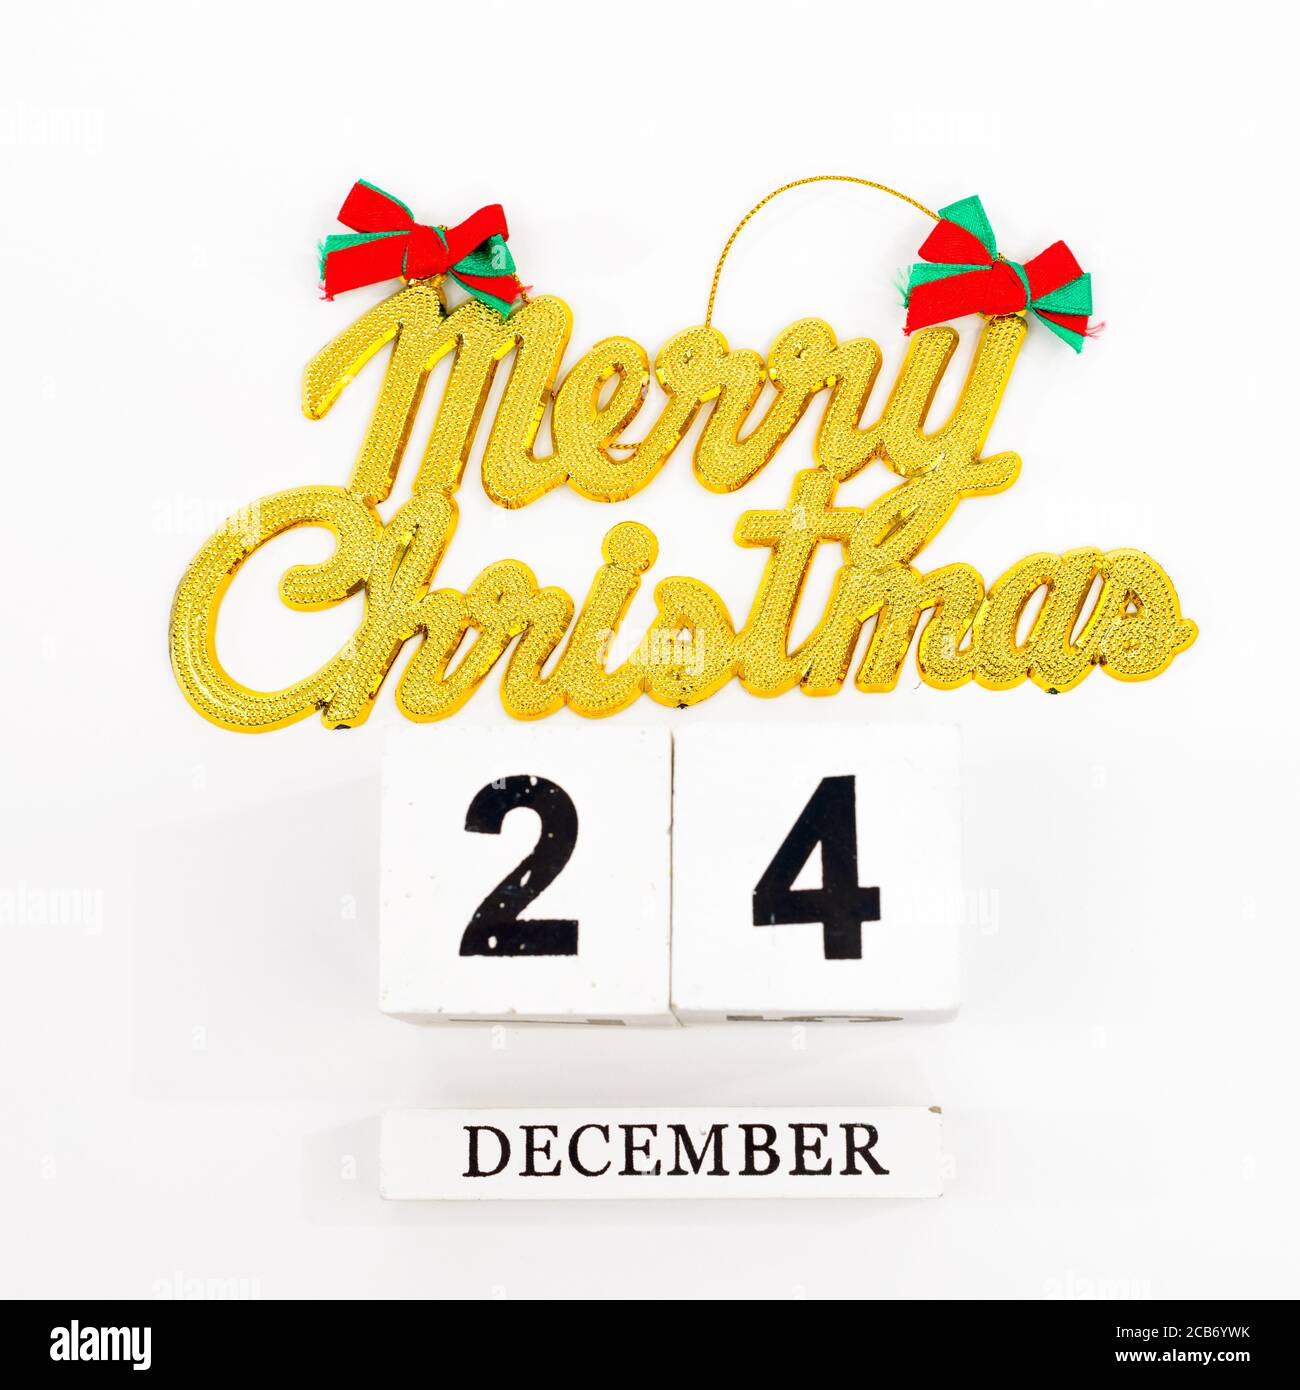 Merry Christmas 24 December decoration text against white background Stock Photo